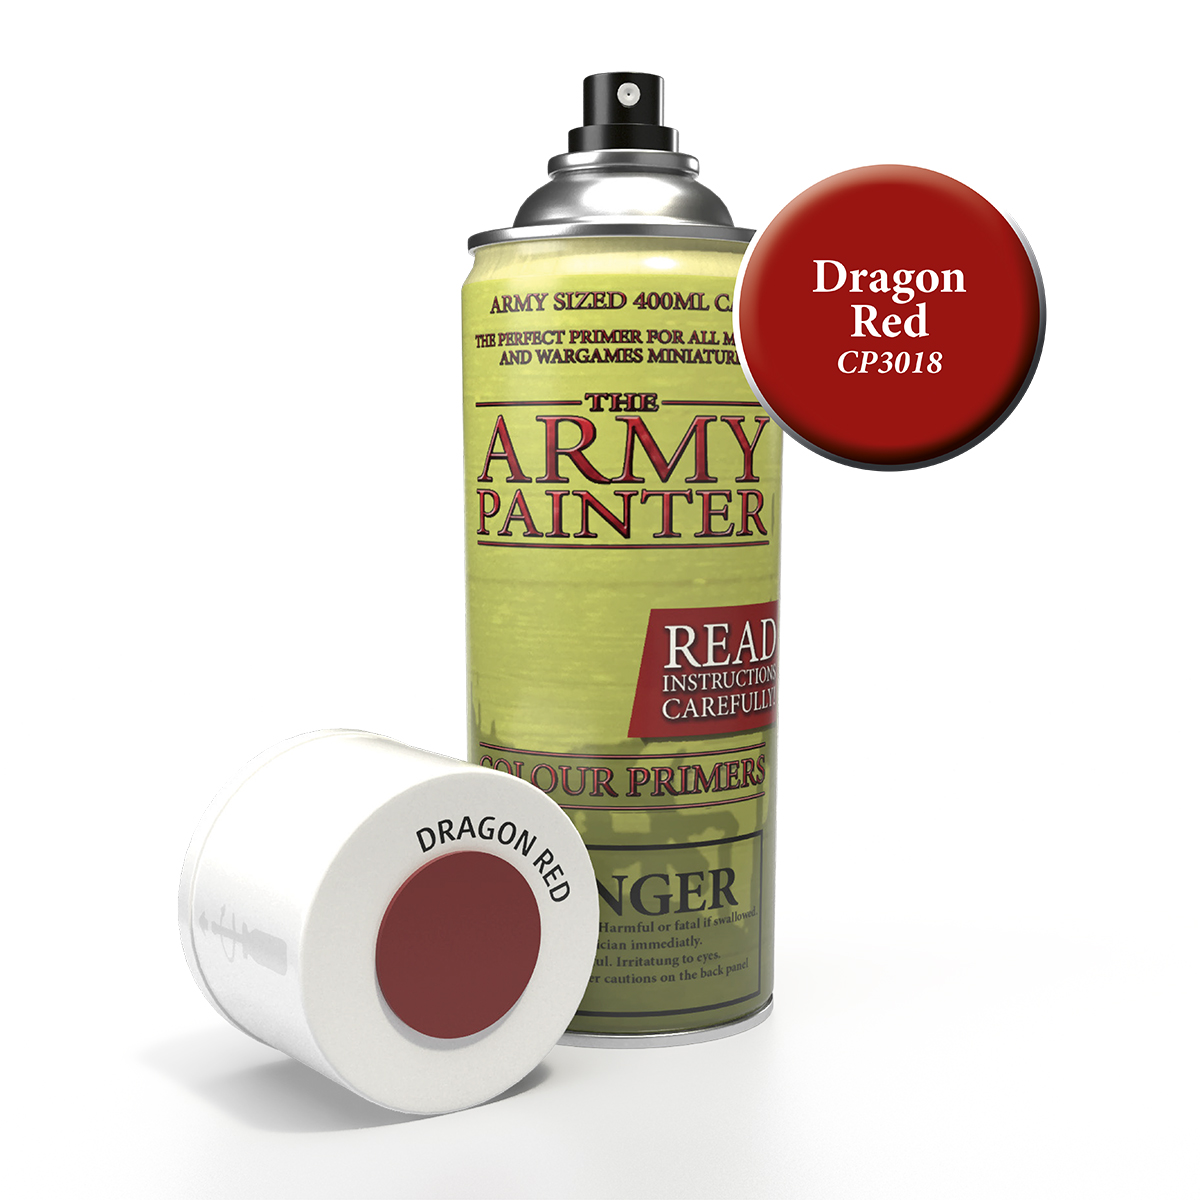 ArmyPainter Colorspray Dragon Red